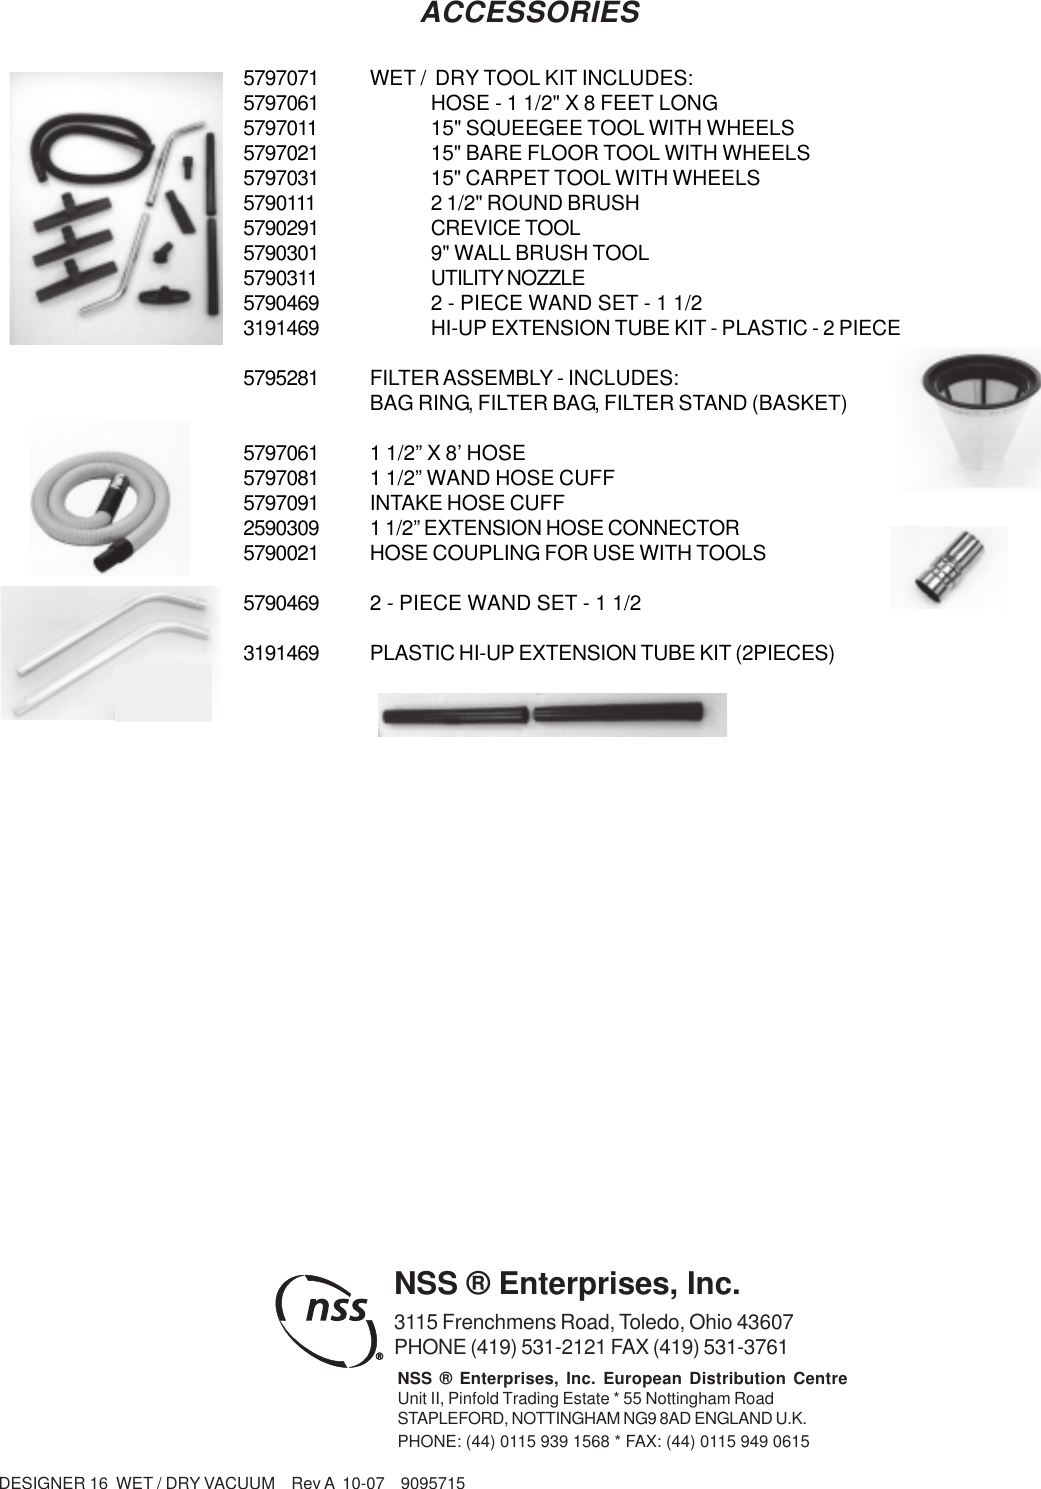 Page 8 of 8 - 9095715 Designer 16 Illustrated Parts Book Orig-1_10-07_pcn_11701.pmd  Nss-designer-16-wet-dry-vac-parts-manual